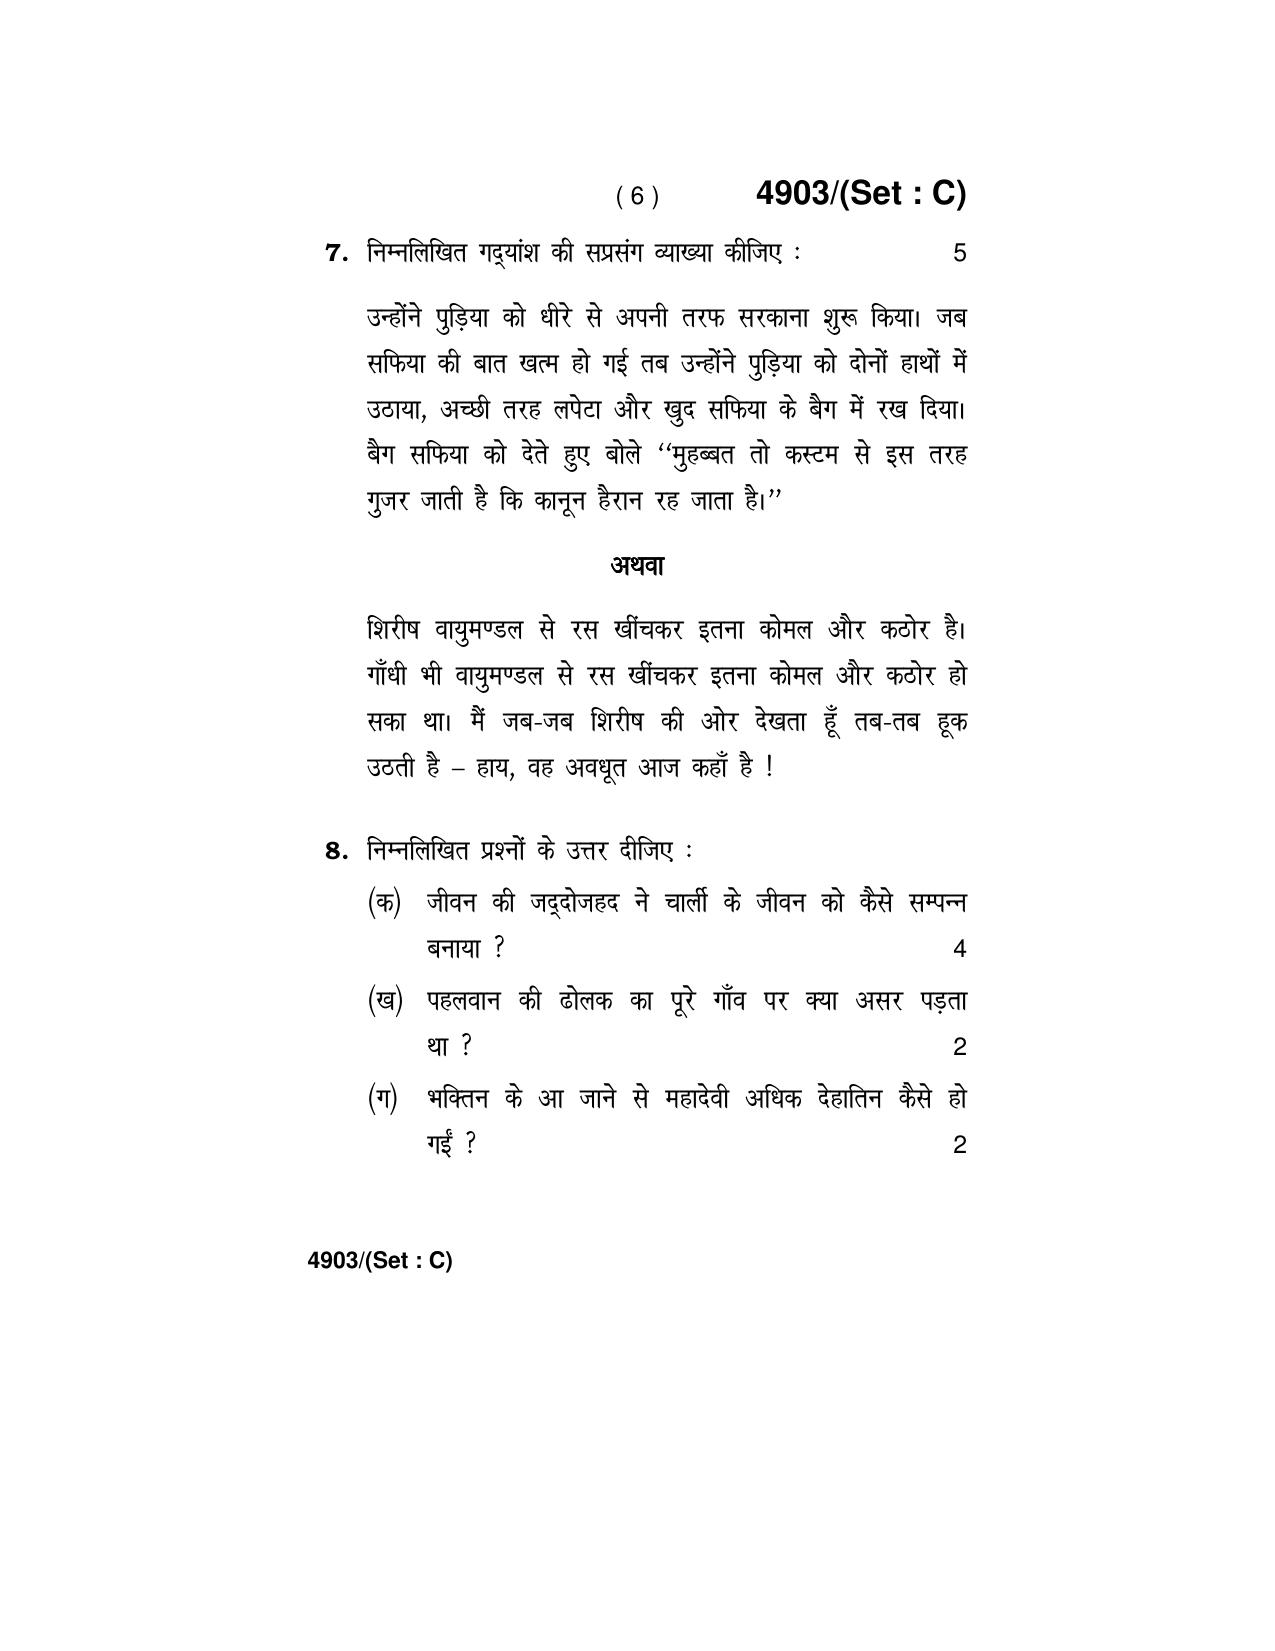 Haryana Board HBSE Class 12 Hindi Core 2020 Question Paper - Page 22